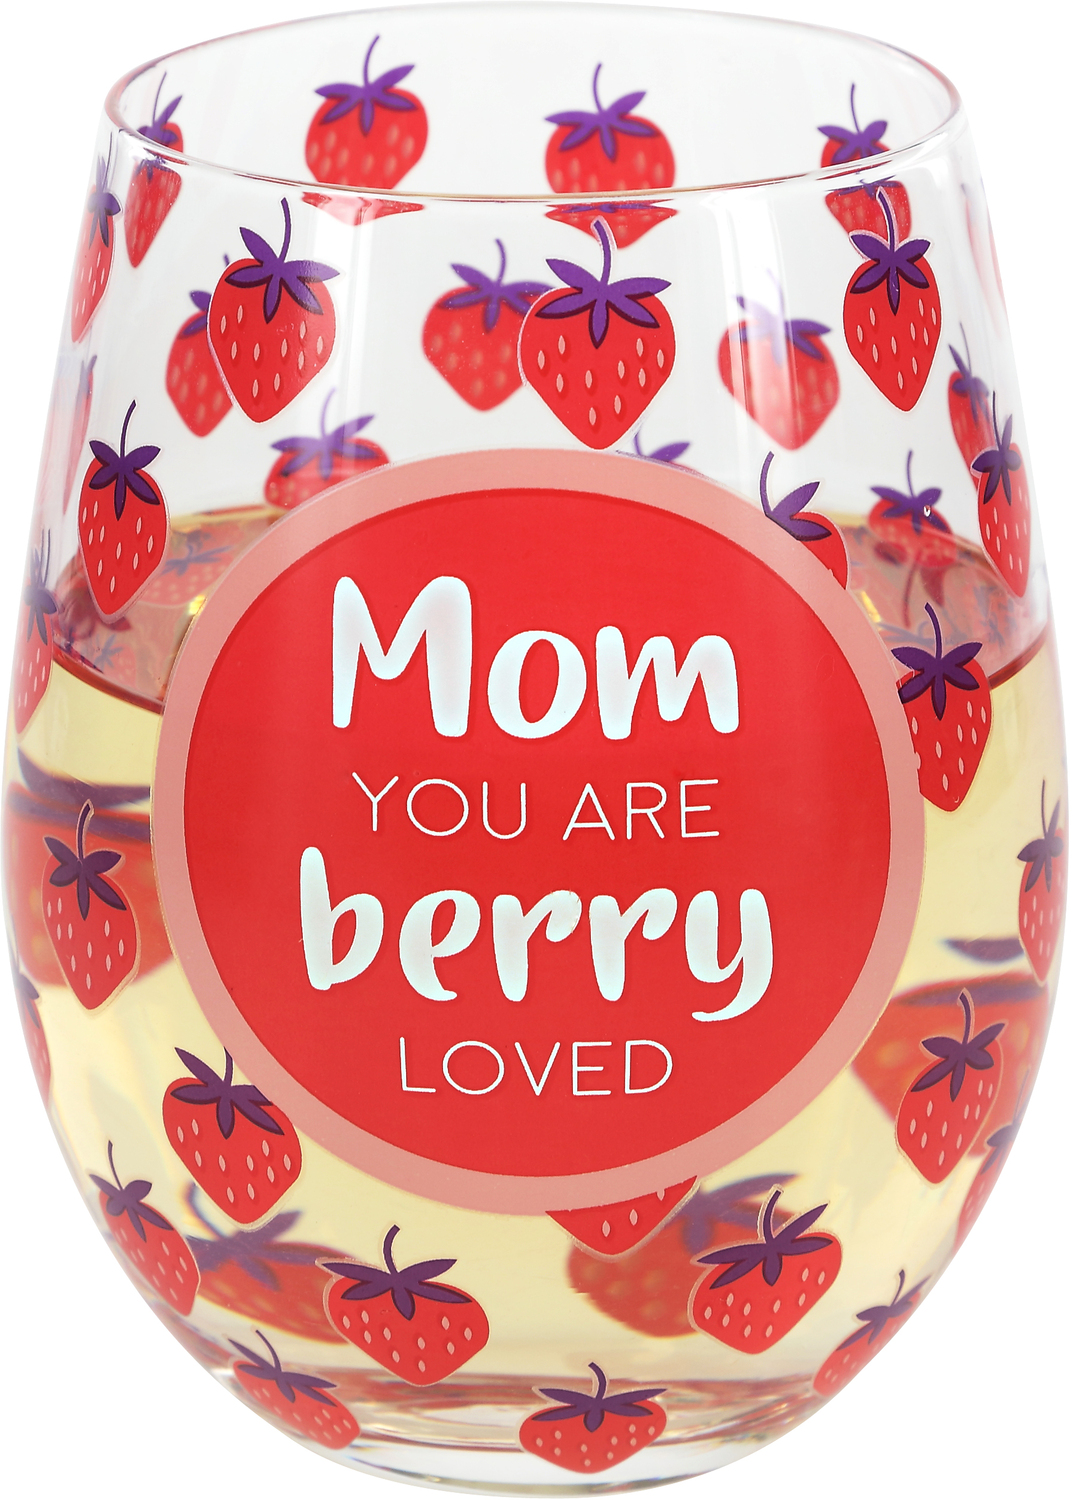 Mom by Livin' on the Wedge - Mom - 18 oz Stemless Wine Glass